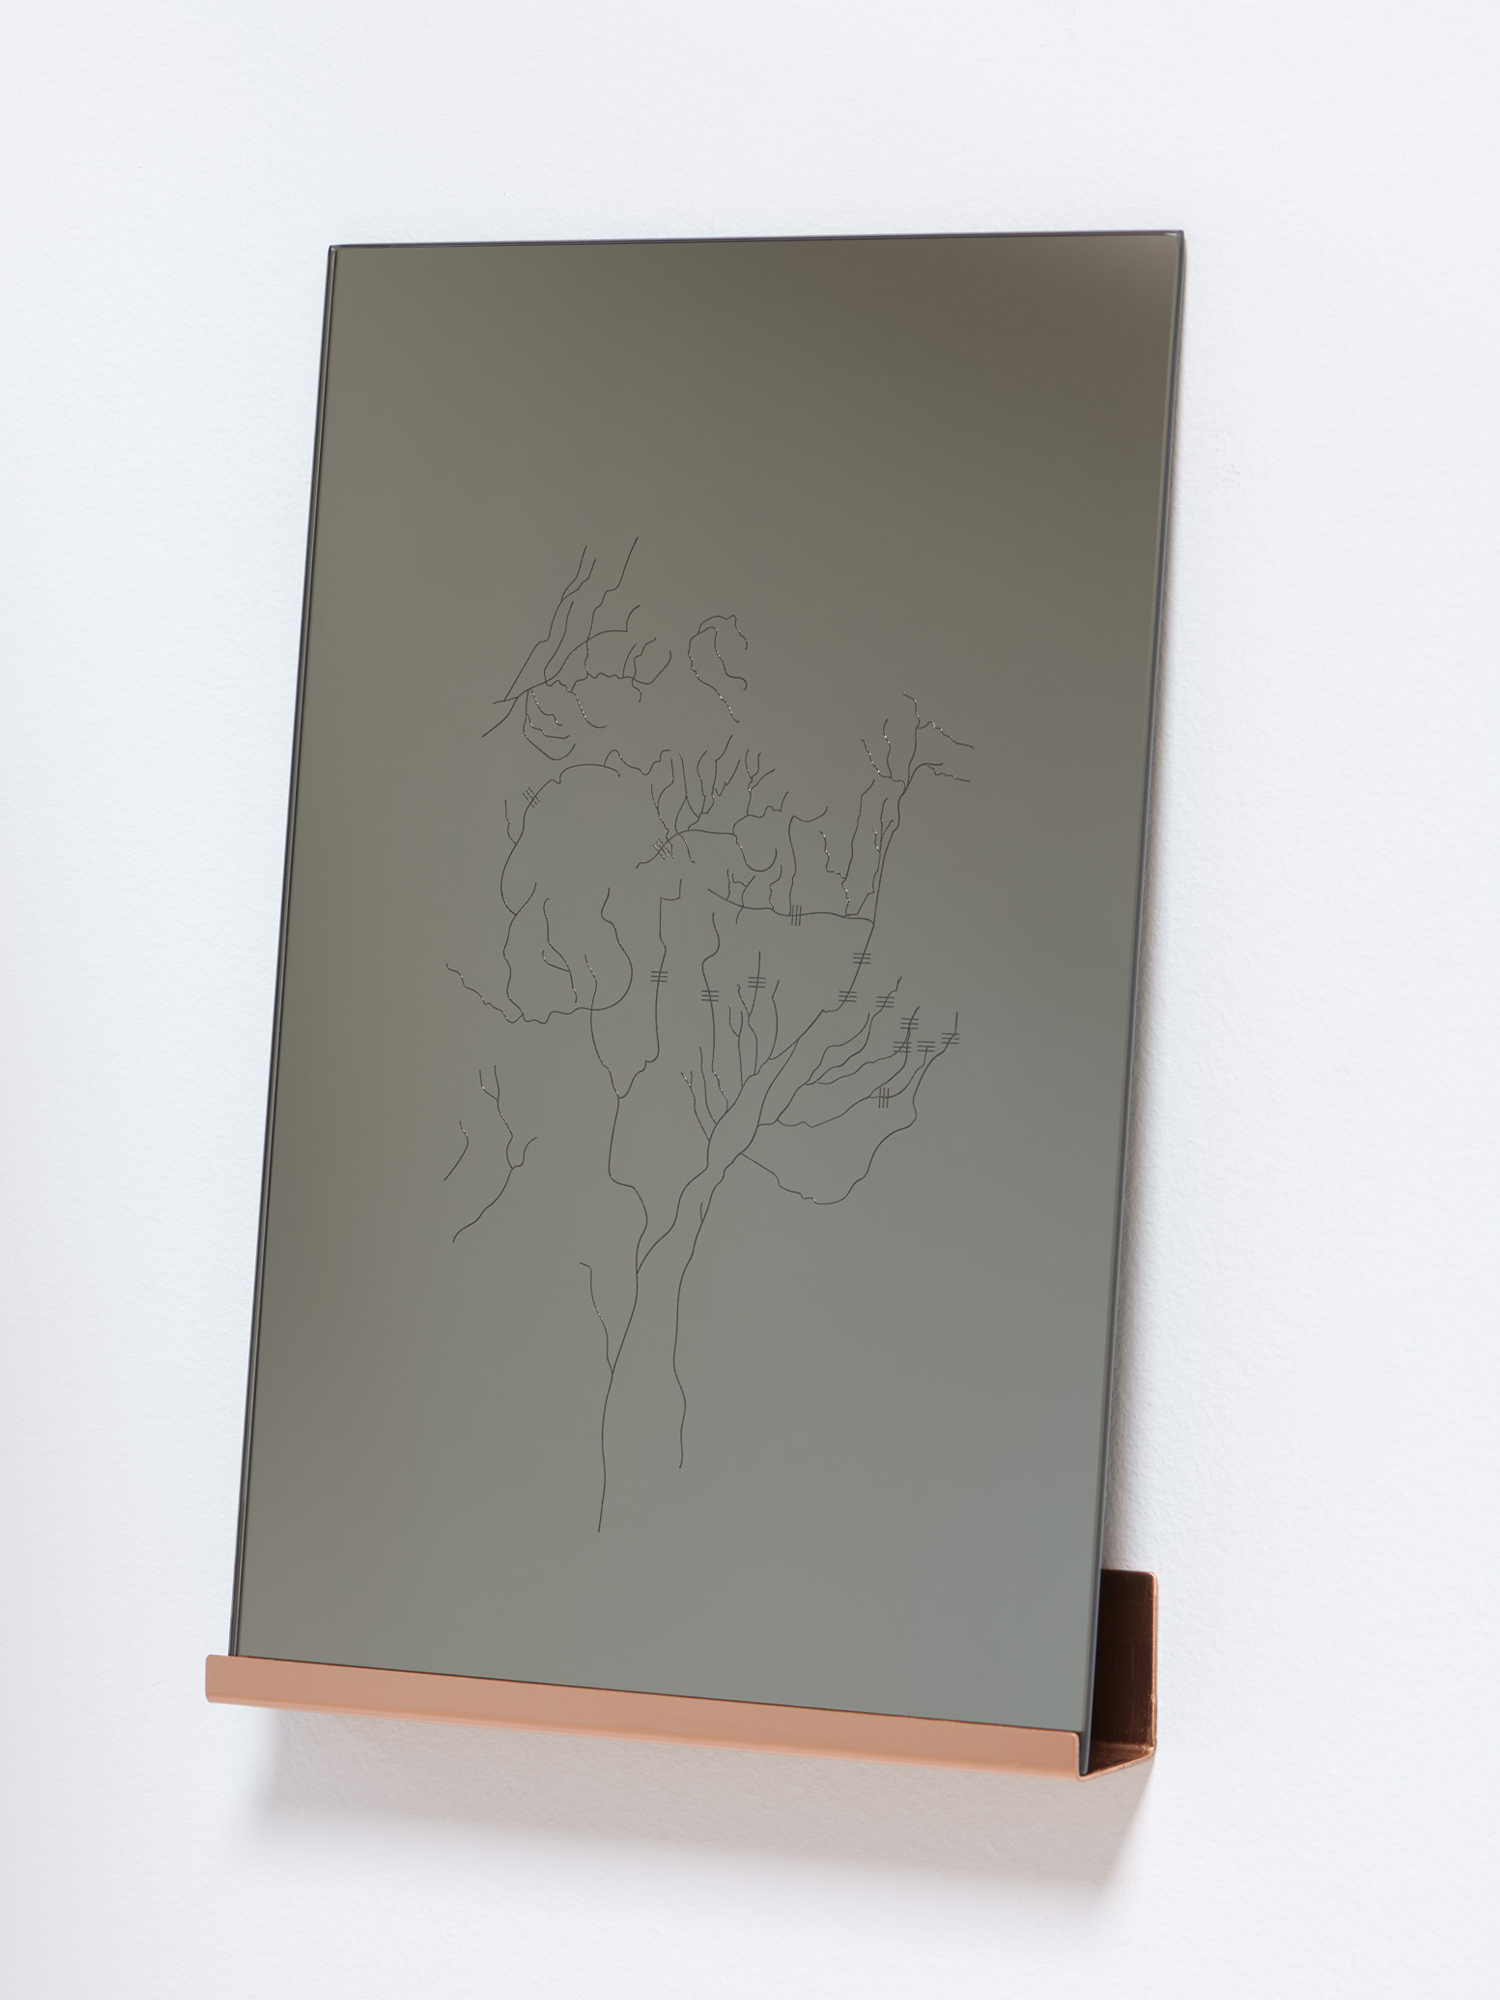 A-Place-Of-Wate-Dams_Mirror-Copper_11x17x2_2021